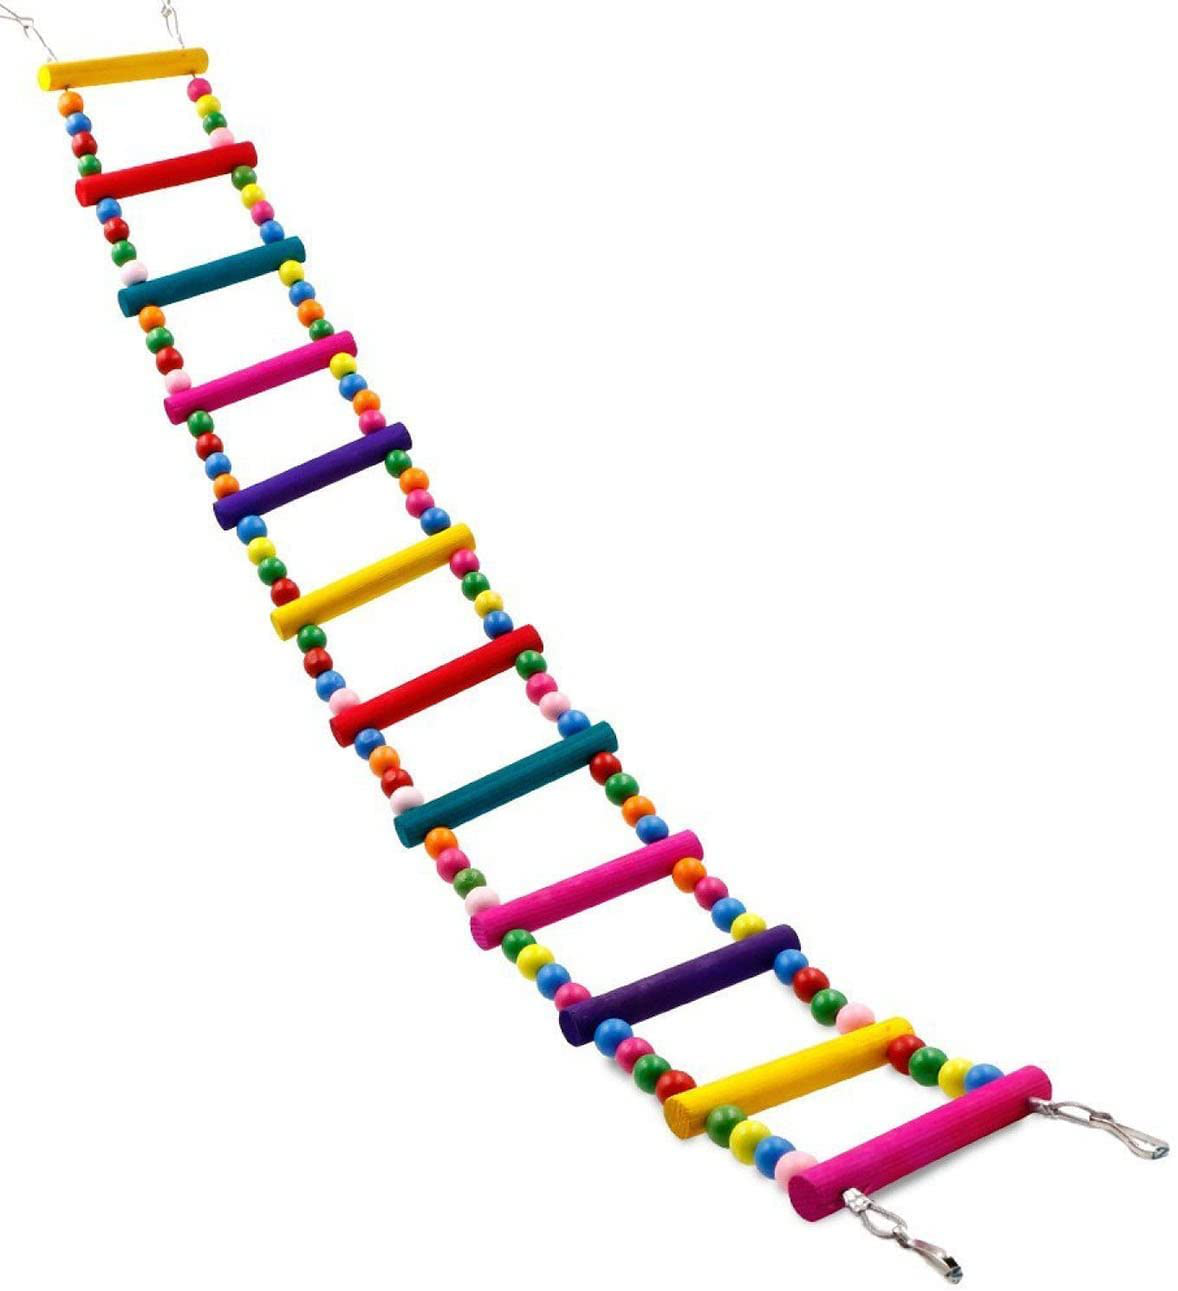 Uheng Colorful Bird Ladder Toys for Parrot, Pet Swings Chew Hanging Bridge, Wooden Rainbow Cage Training Accessories for Cockatiel Conure Parakeet Small Macaw Budgie Animals & Pet Supplies > Pet Supplies > Bird Supplies > Bird Ladders & Perches Uheng   